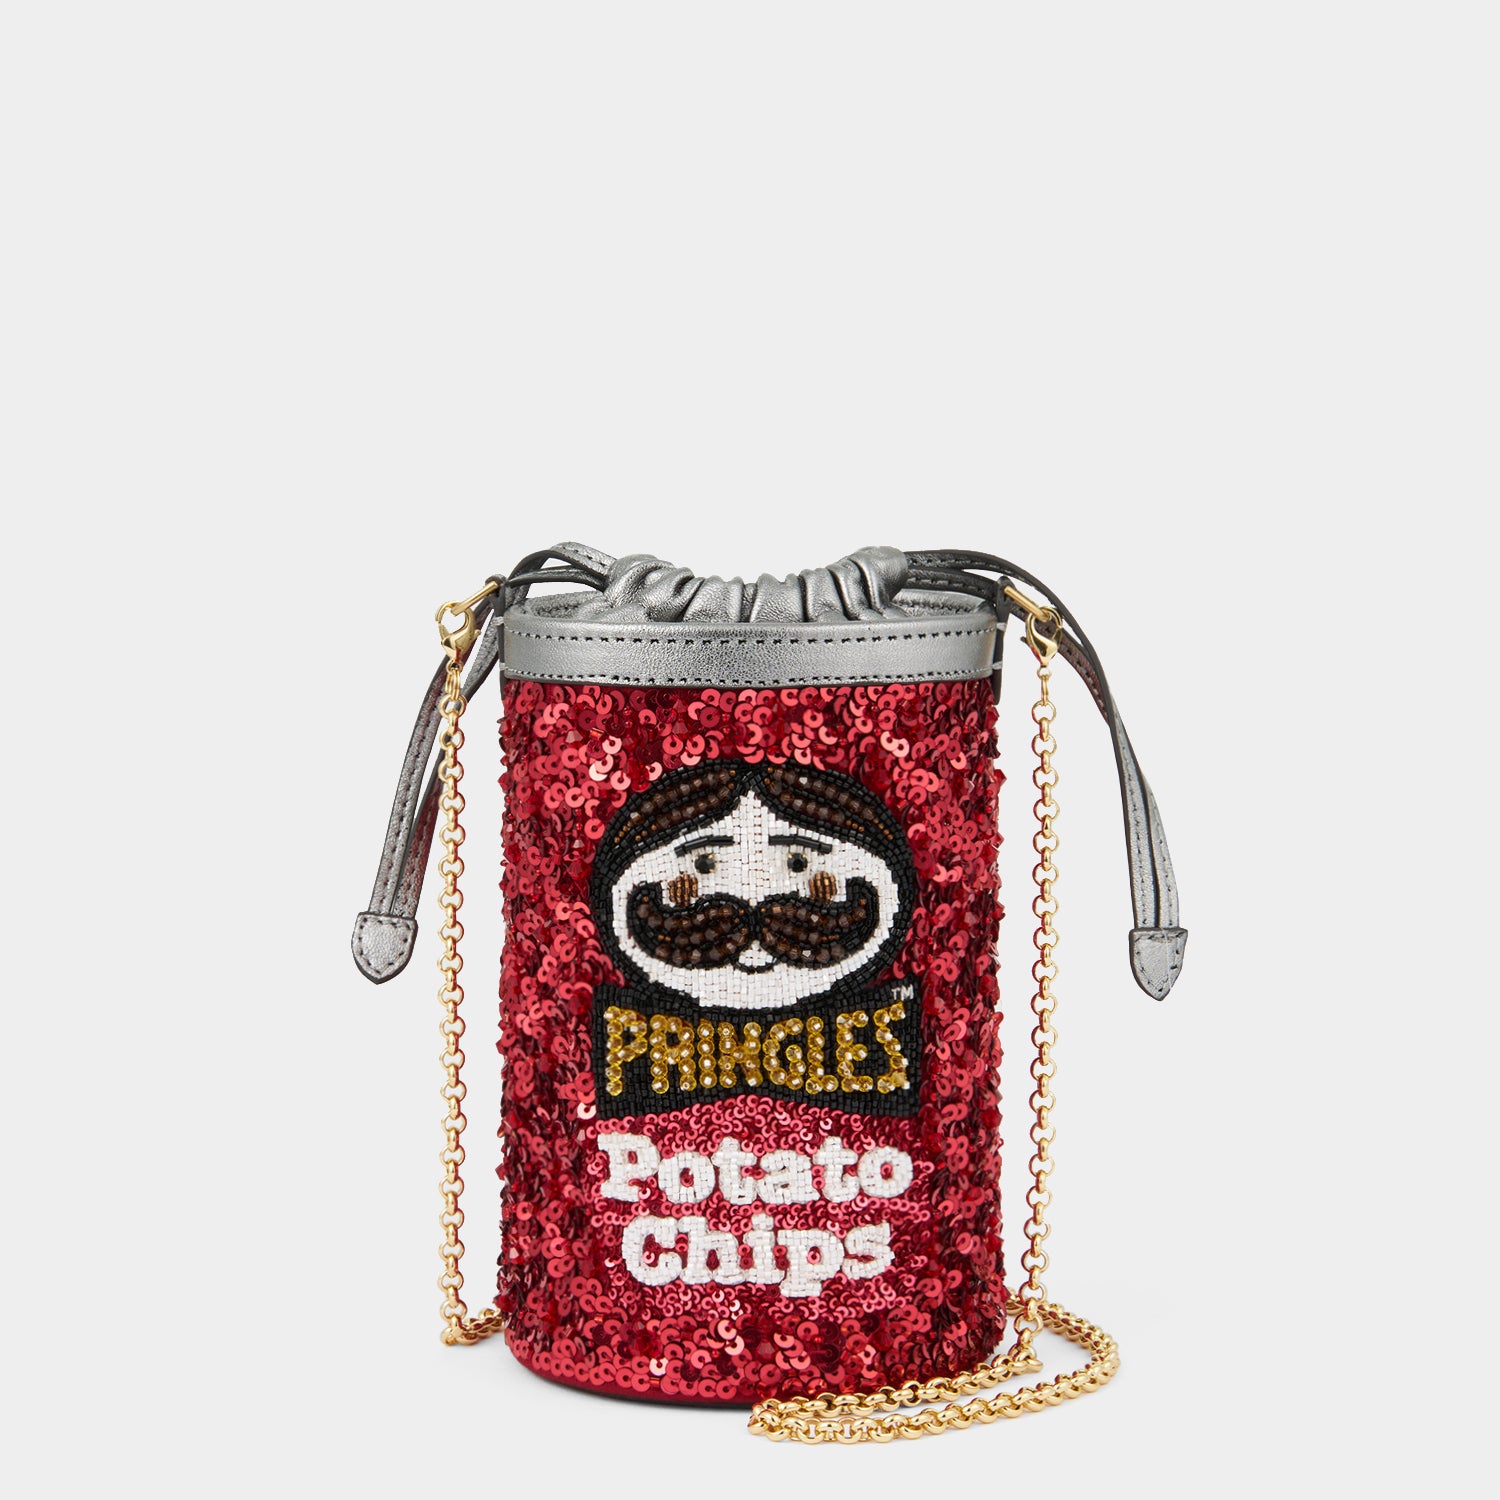 「Pringles」ミニ バケット -

                  
                    Satin in Red -
                  

                  Anya Hindmarch JP
